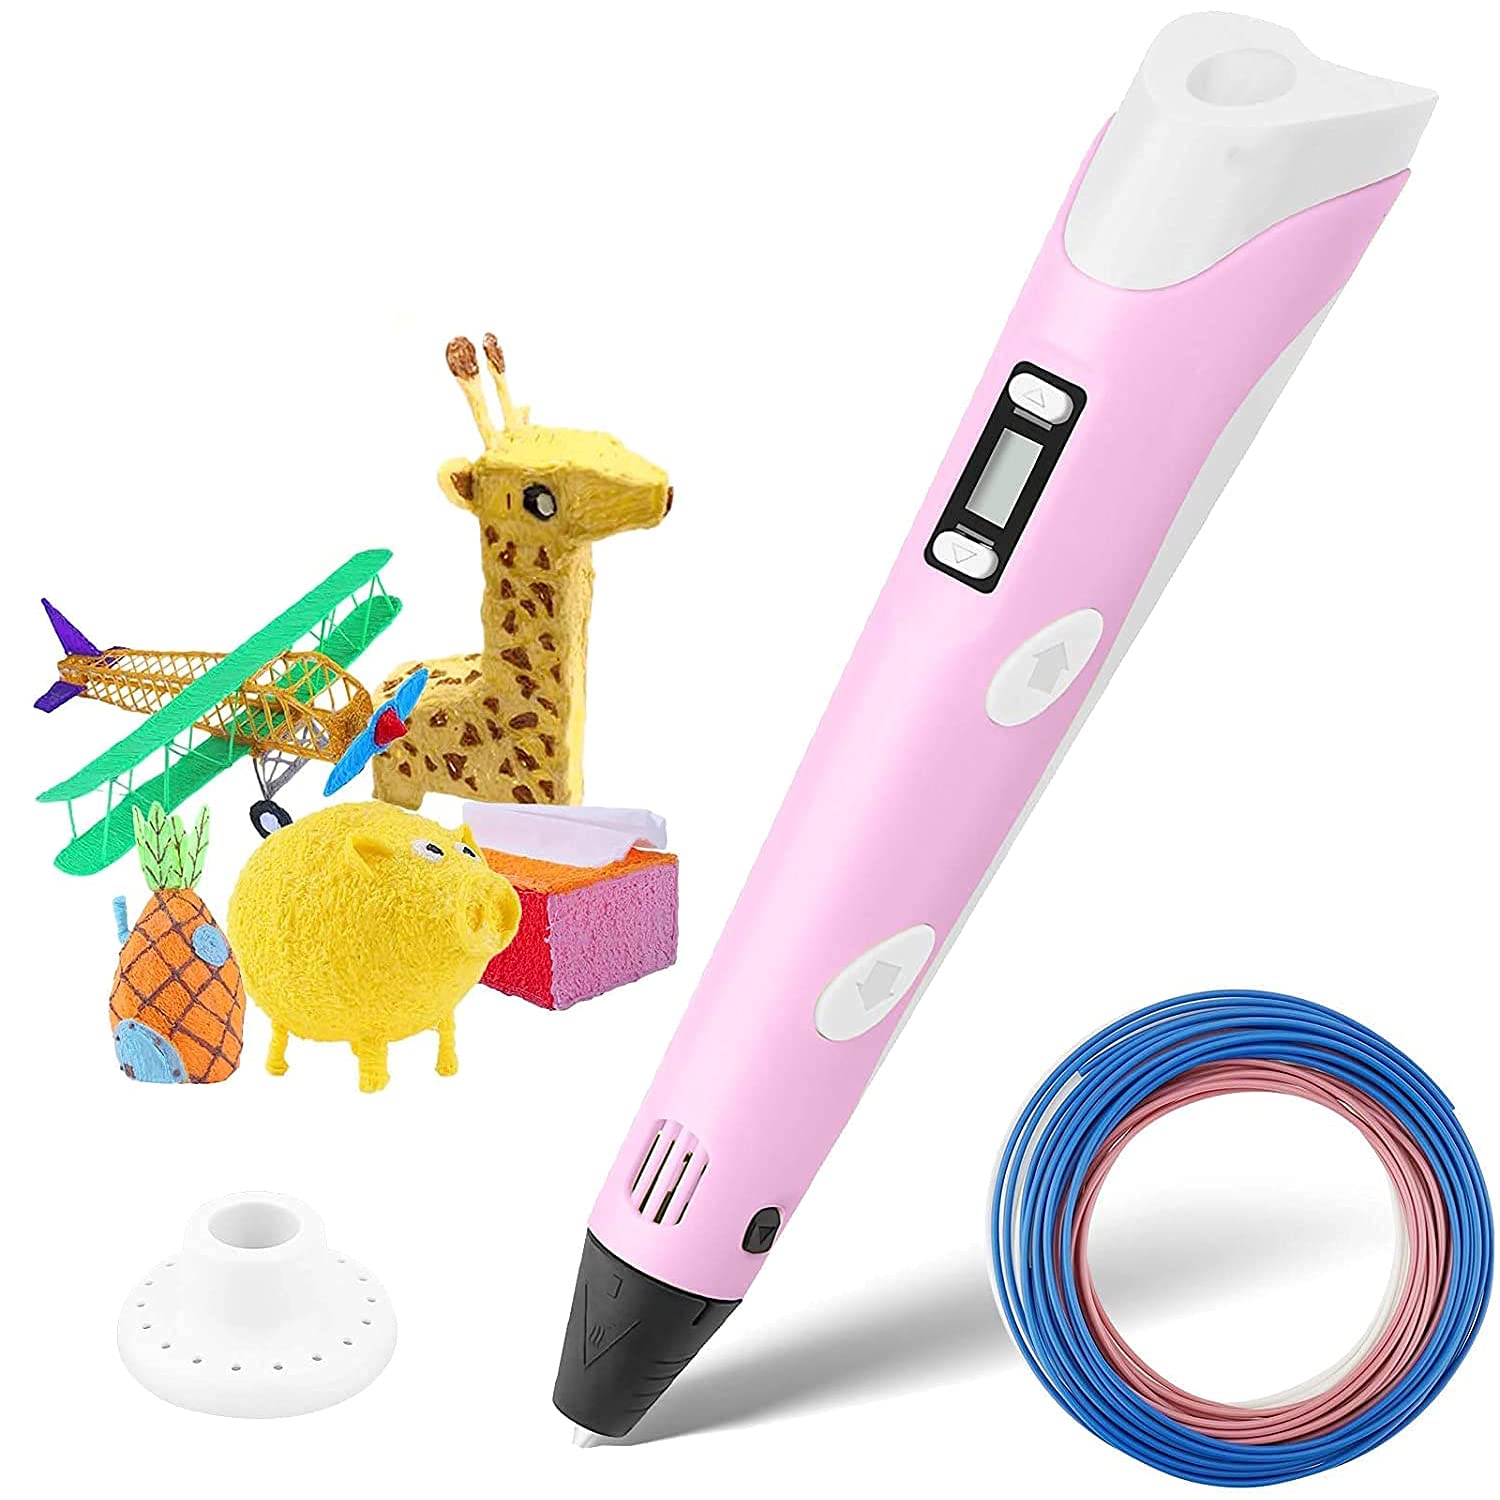 Pink 3D Printing Pen Mat - 3D Pen Mat for Kids, Adults - 16.3x10.8 inch 3D  mat with Animal Patterns for 3D Printing Pen - Great 3D Silicone Pen Mat 